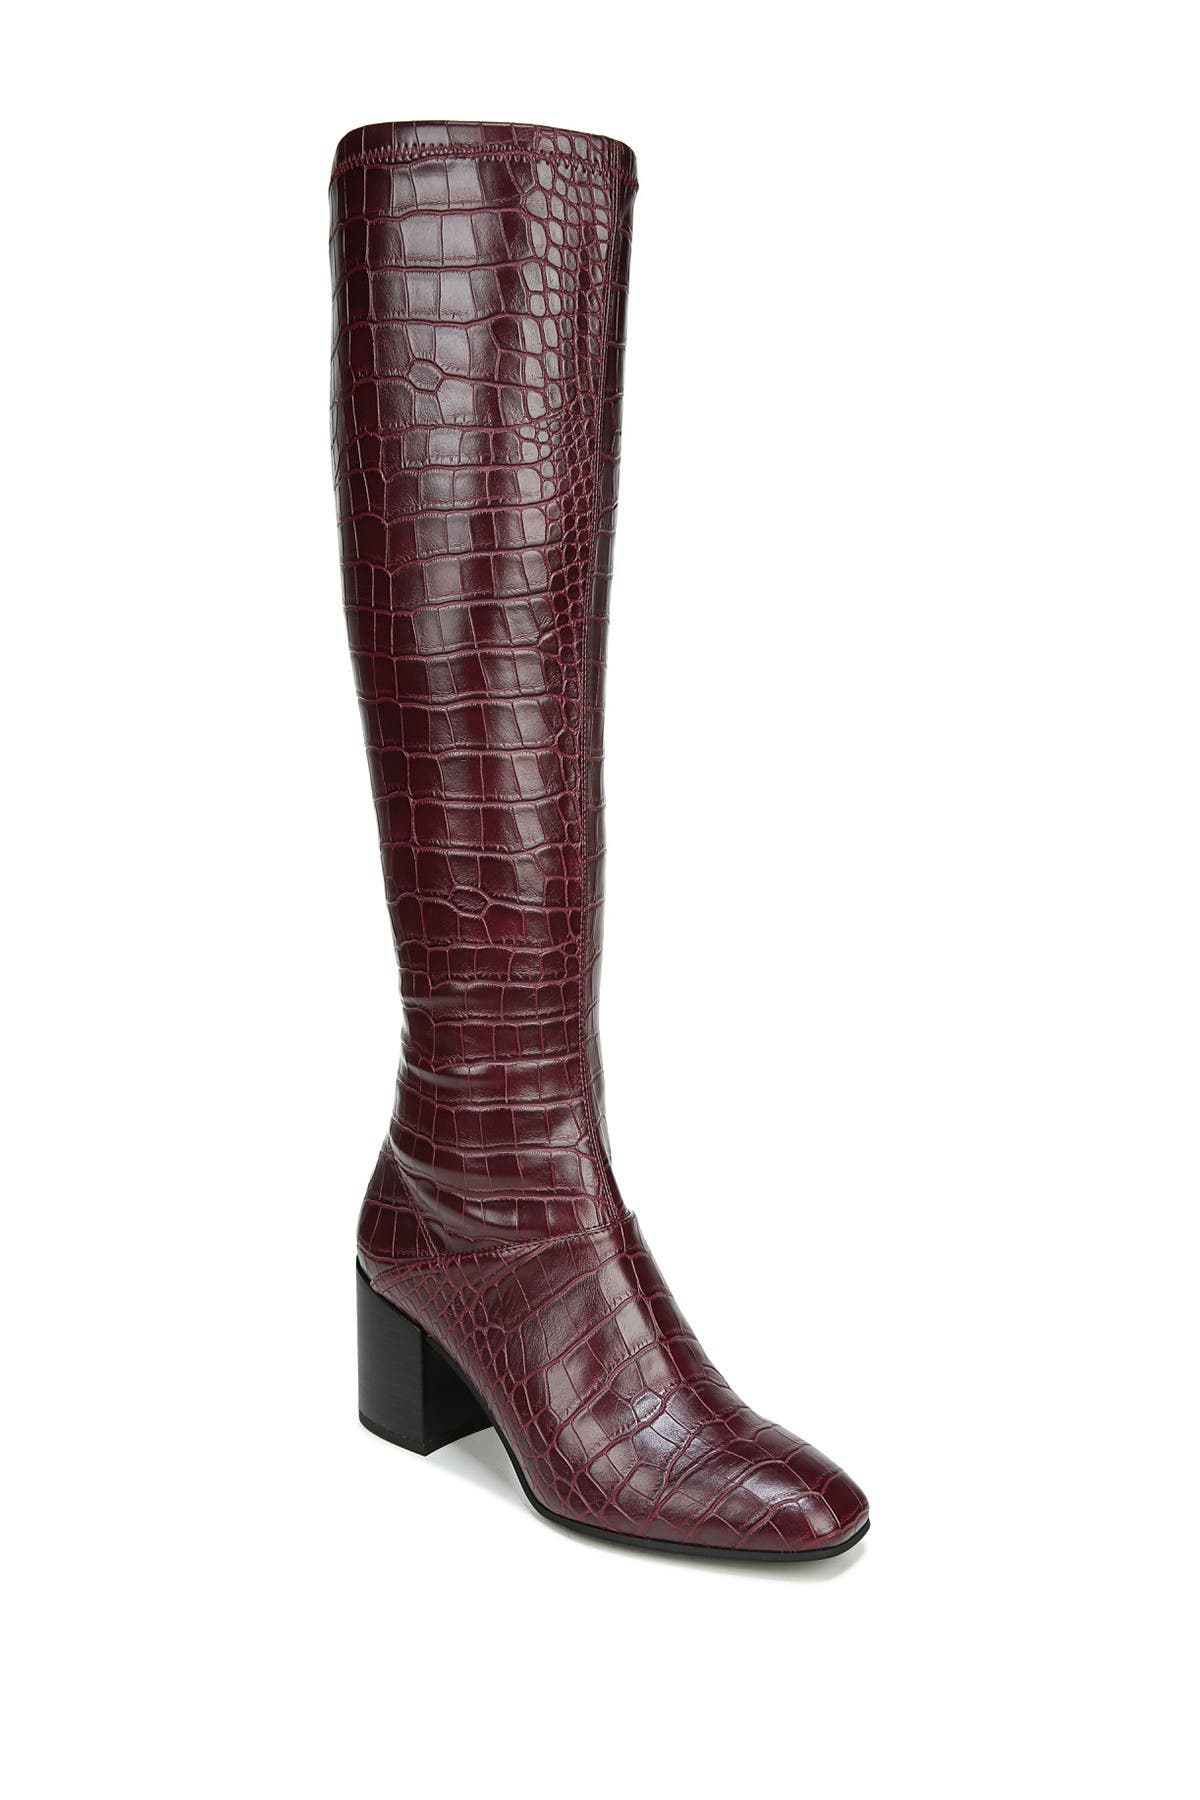 Tribute Croc Embossed Leather Boot 